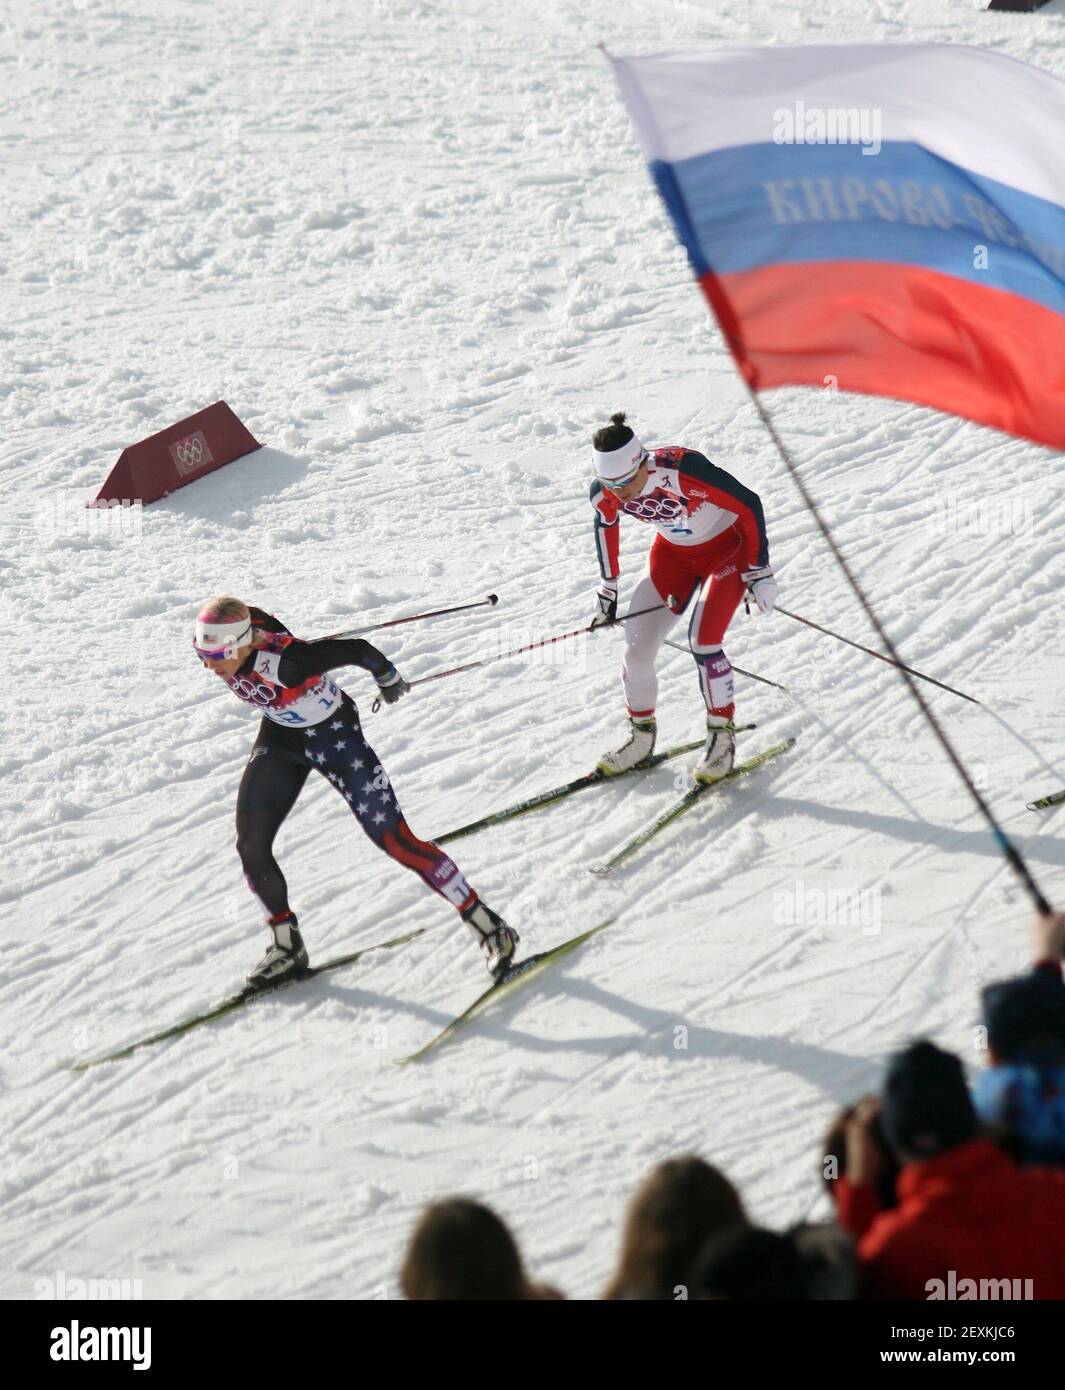 Kikkan Randall, of Anchorage, Alaska, struggles to fight off Marit Bjoergen, of Norway, before the final turn of the women's sprint quarterfinal at the Laura Nordic Center in Krasnaya Polyana, Russia, on Tuesday, Feb. 11, 2014. Randall would falter down the stretch and finish fourth in her group, missing the semifinals. (Photo by Tom Peterson/MCT/Sipa USA) Stock Photo